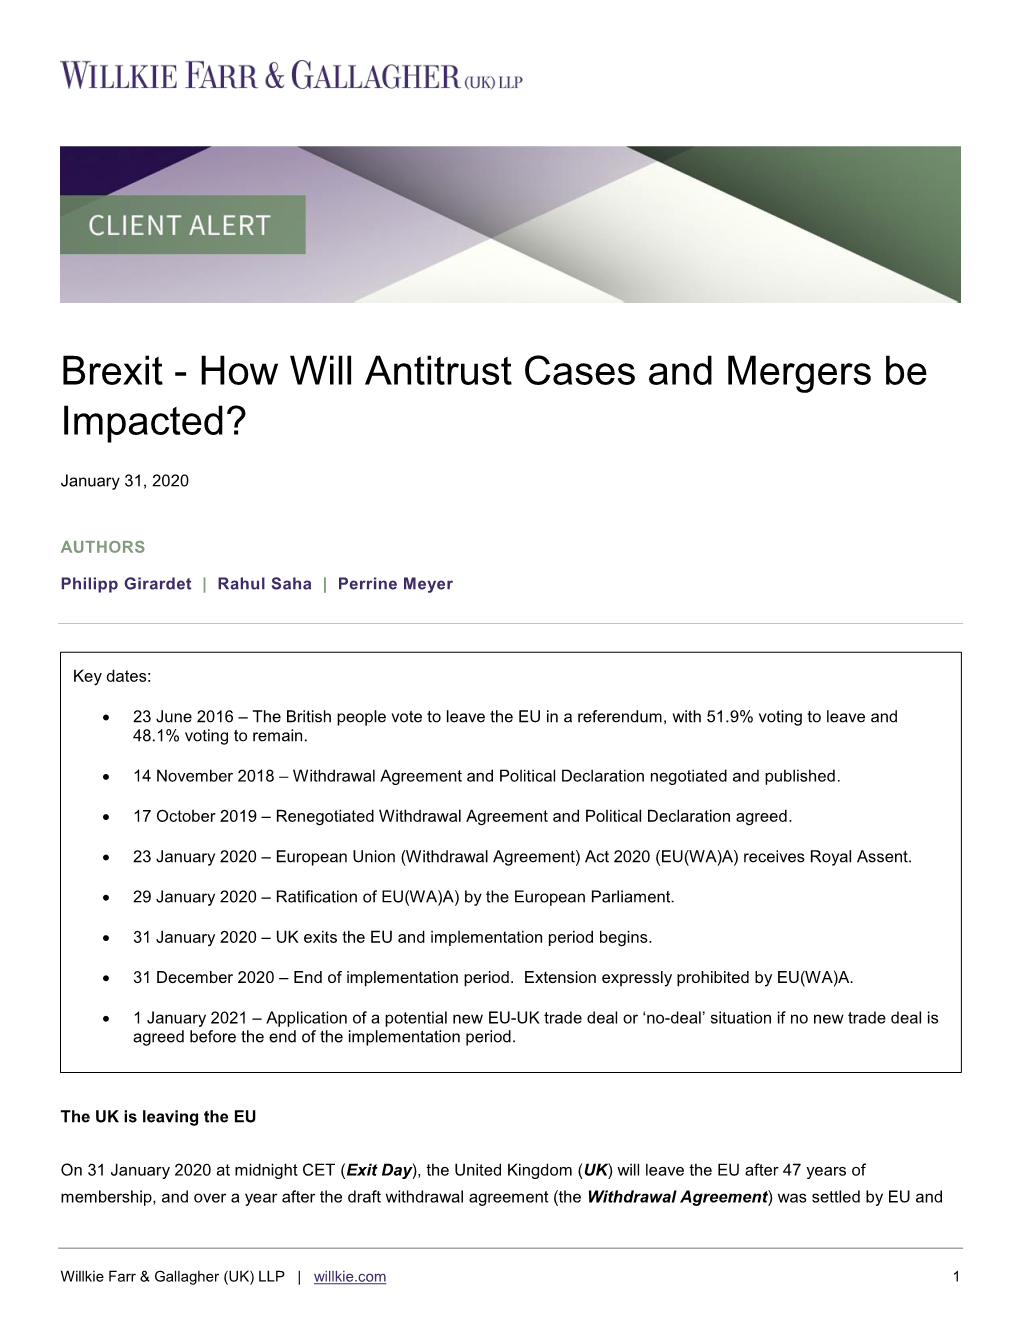 Brexit - How Will Antitrust Cases and Mergers Be Impacted?